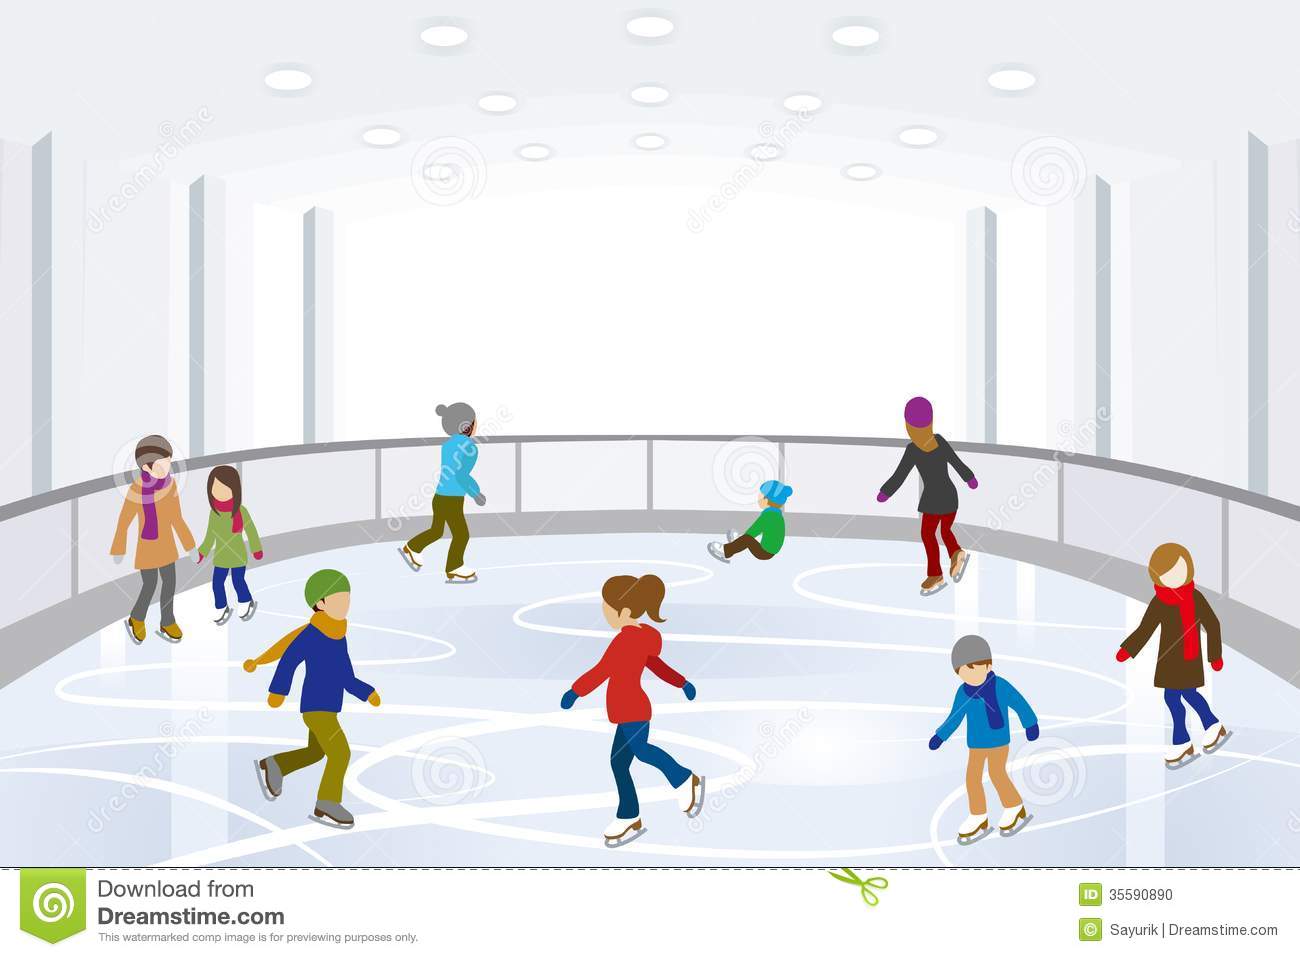 People Ice Skating In Indoor Ice Rink Stock Photo   Image  35590890